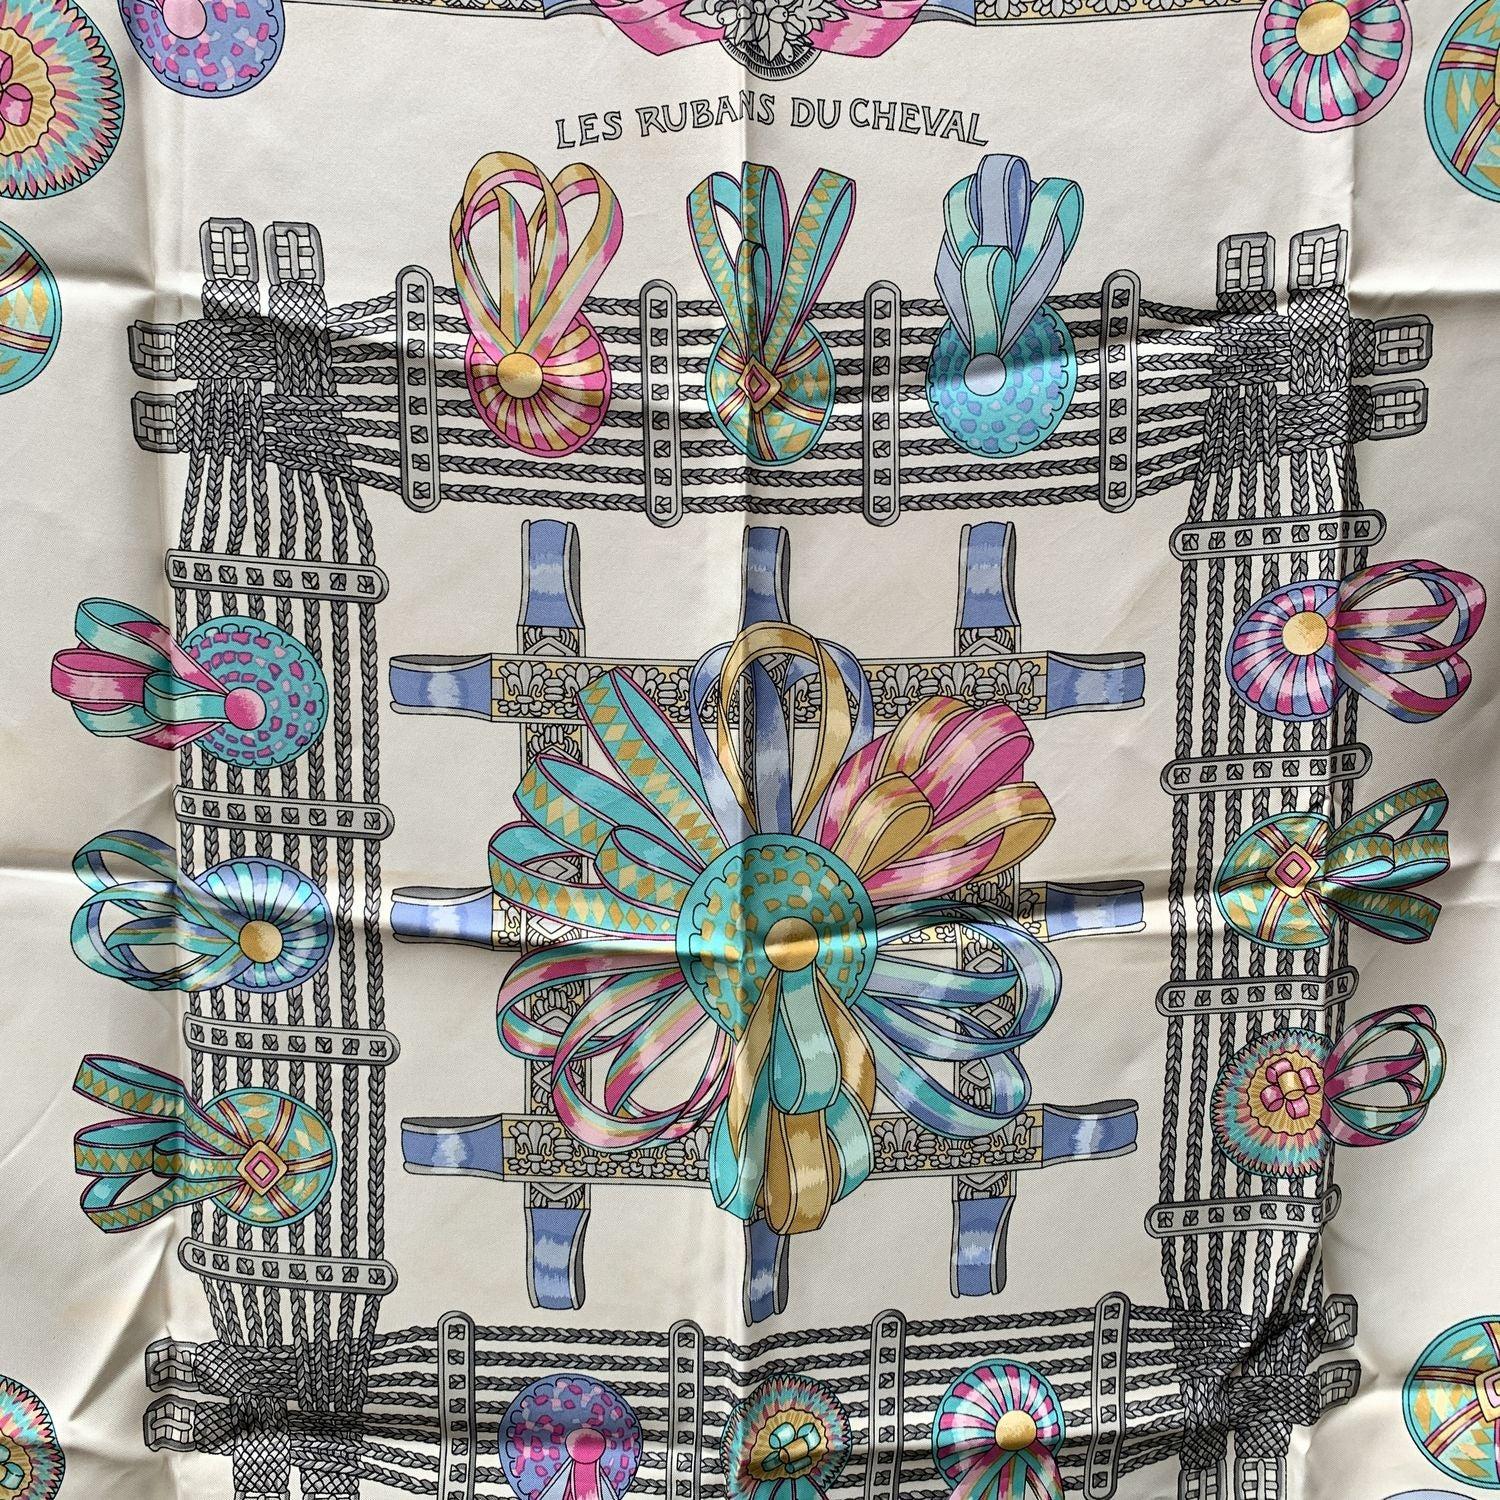 HERMES scarf 'Les Rubans du Cheval' (Horse ribbons) by Joachim Metz and originally issued in 1988, and reissue in 1989 and 1993. It is a truly classics of Hermes maison. This design depicts cockades or prizes won by horses. Black borders. 100% silk,